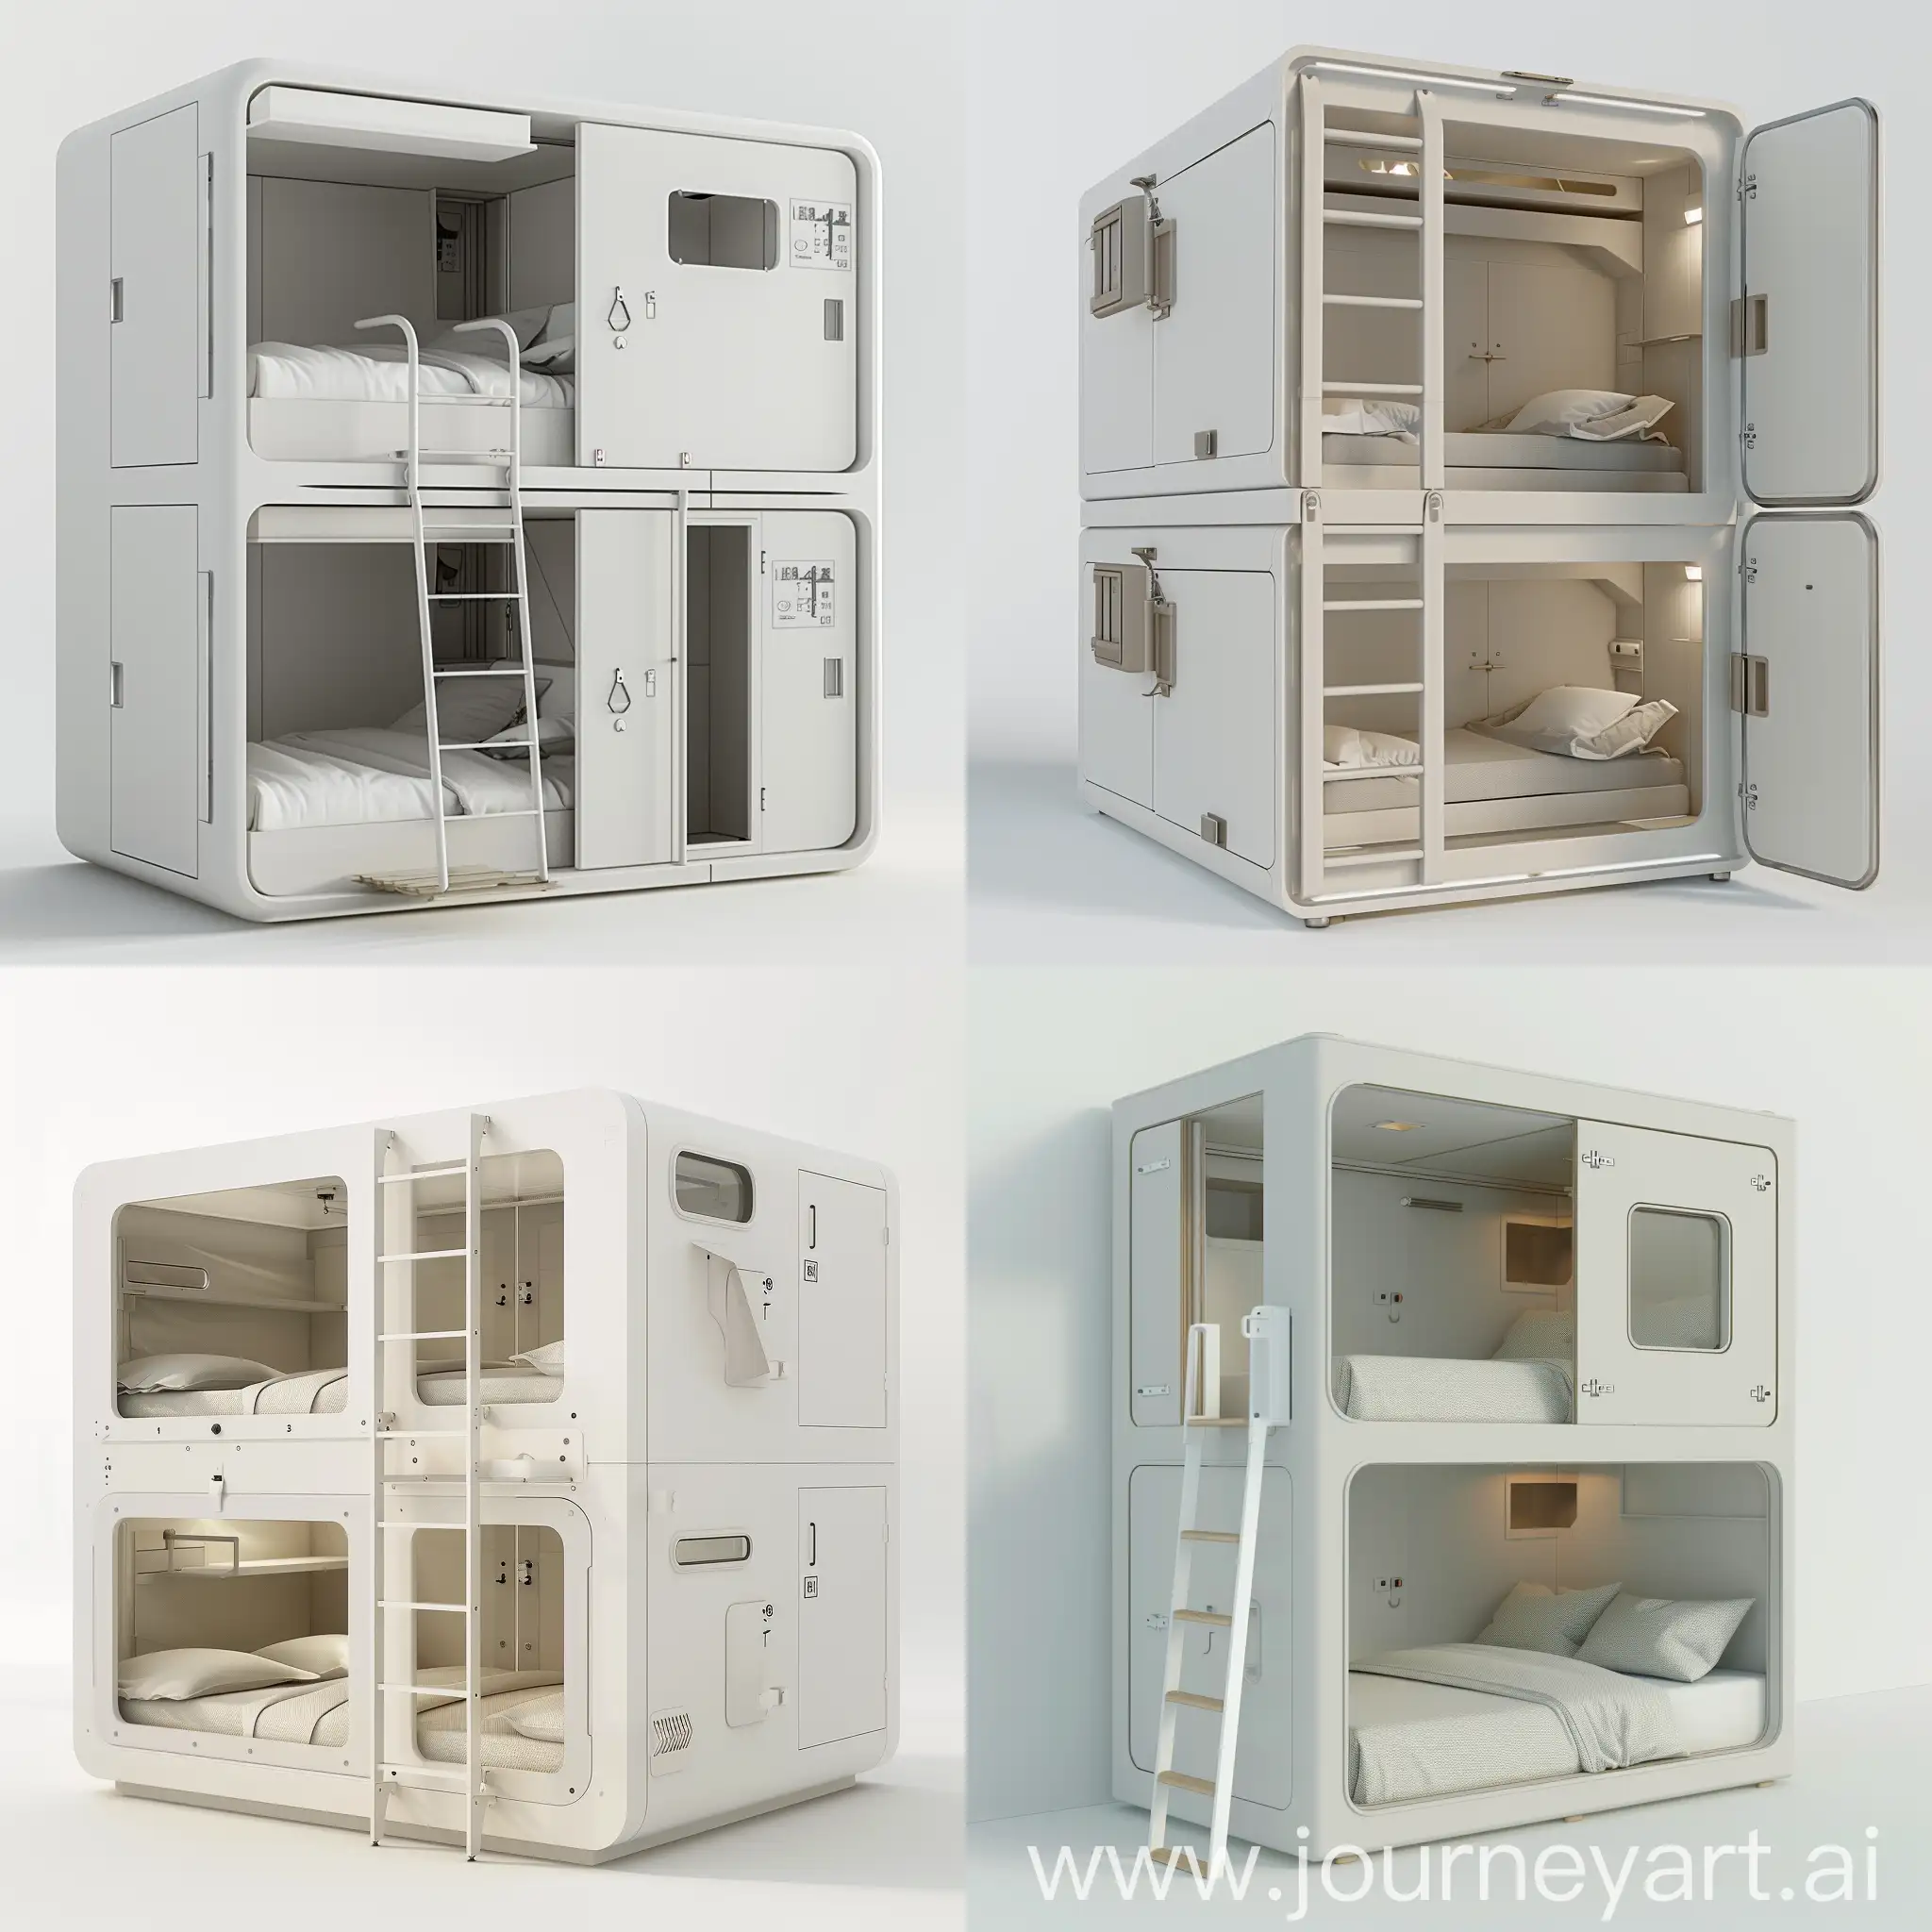 Modern-Japanese-Capsule-Hotel-Unit-with-Loft-Beds-and-White-Wood-Design